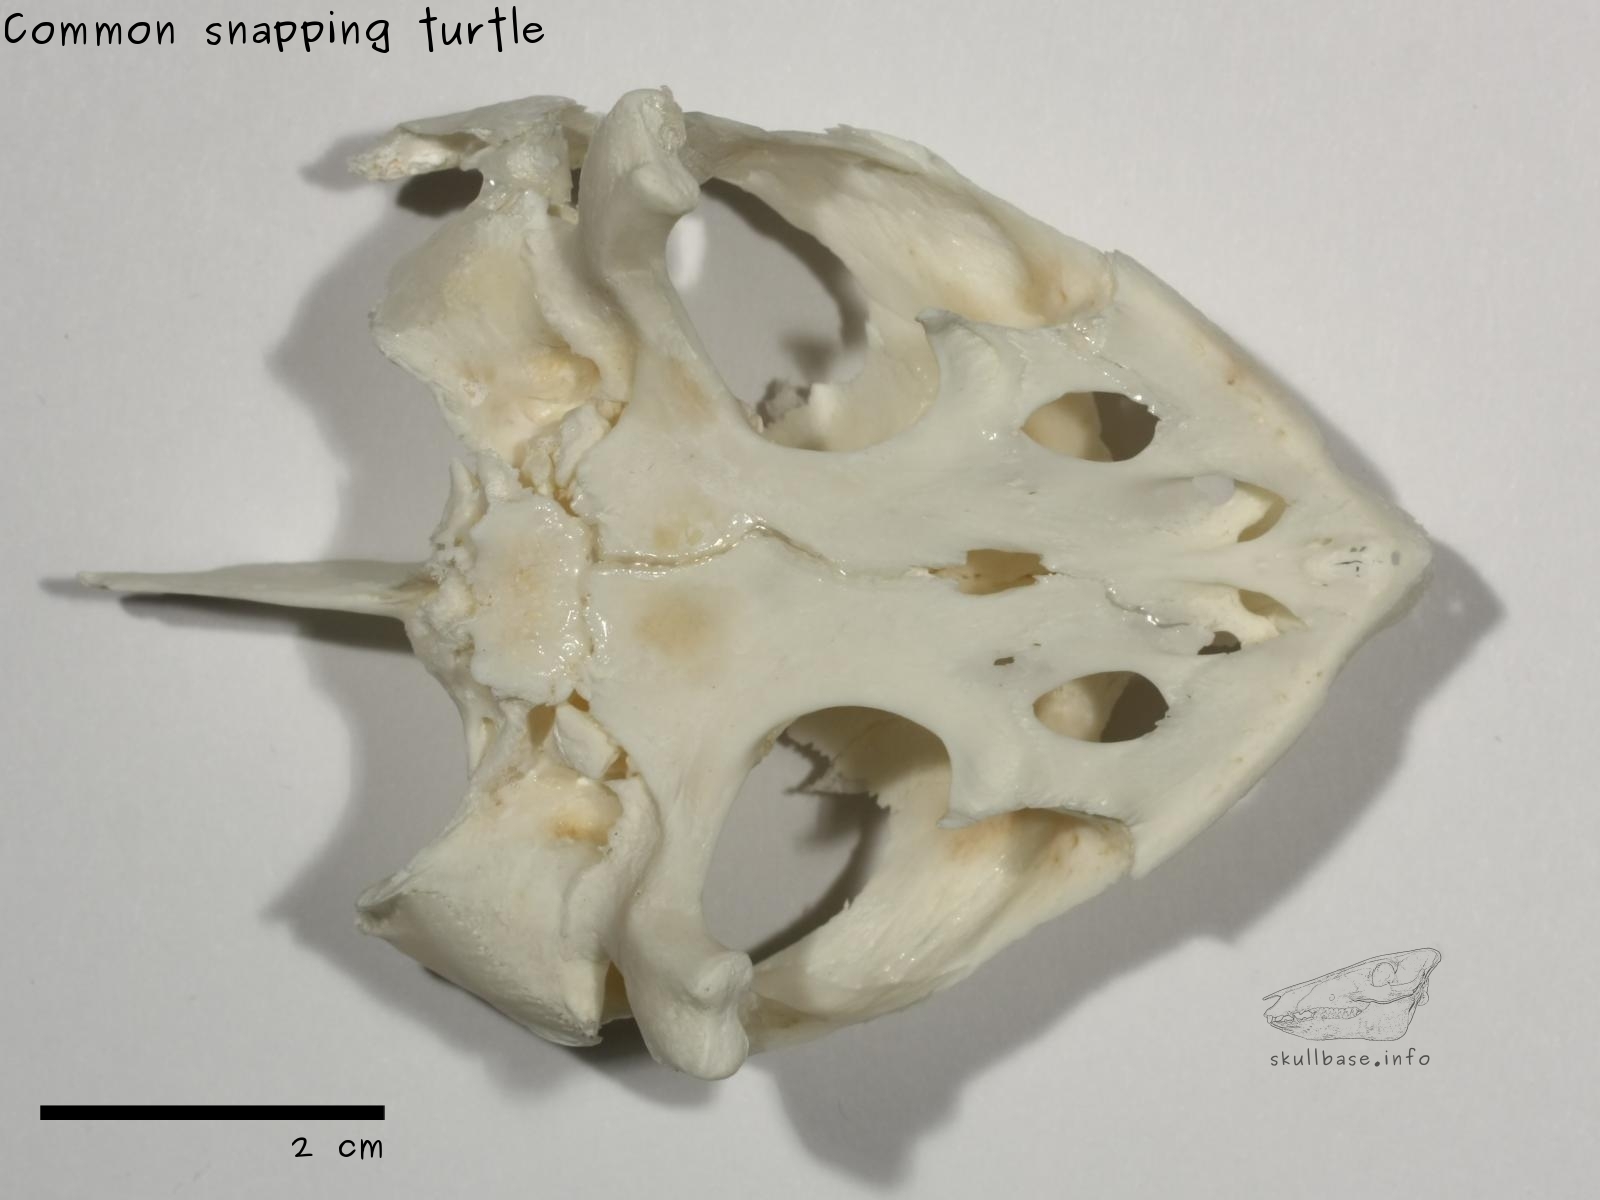 Common snapping turtle (Chelydra serpentina) skull ventral view